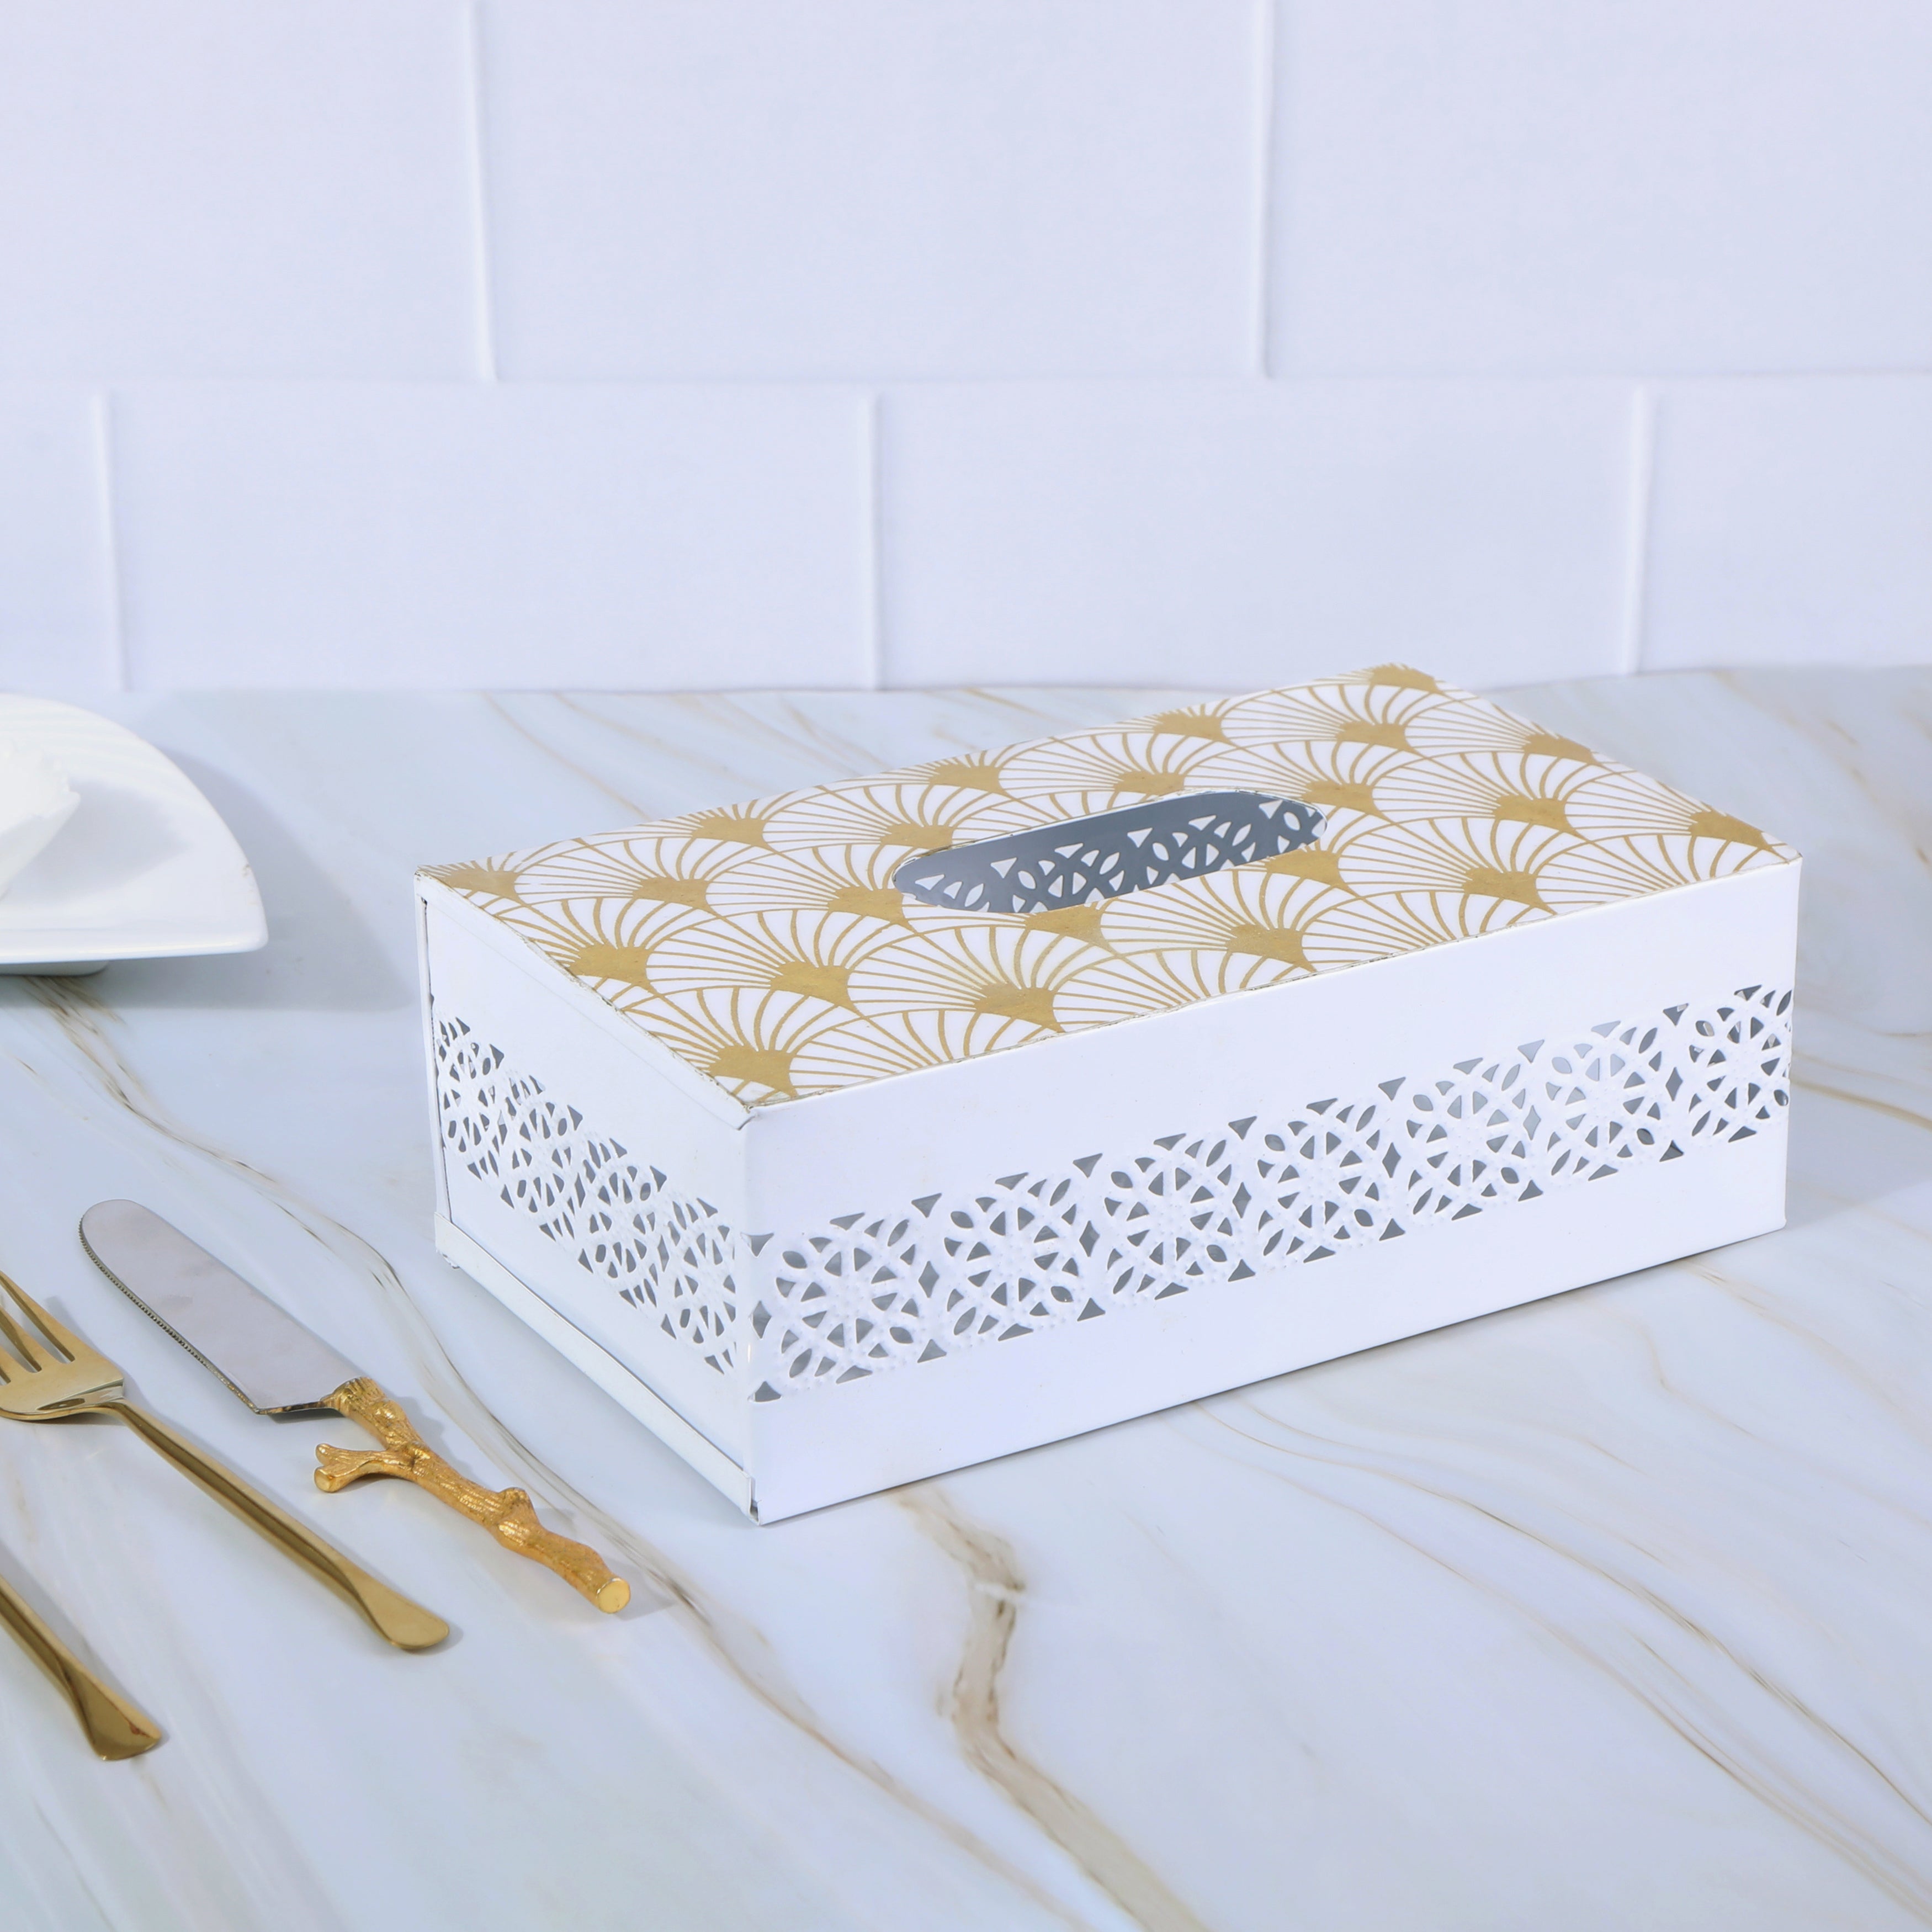 Tissue Box - Gold Metal 1- The Home Co.